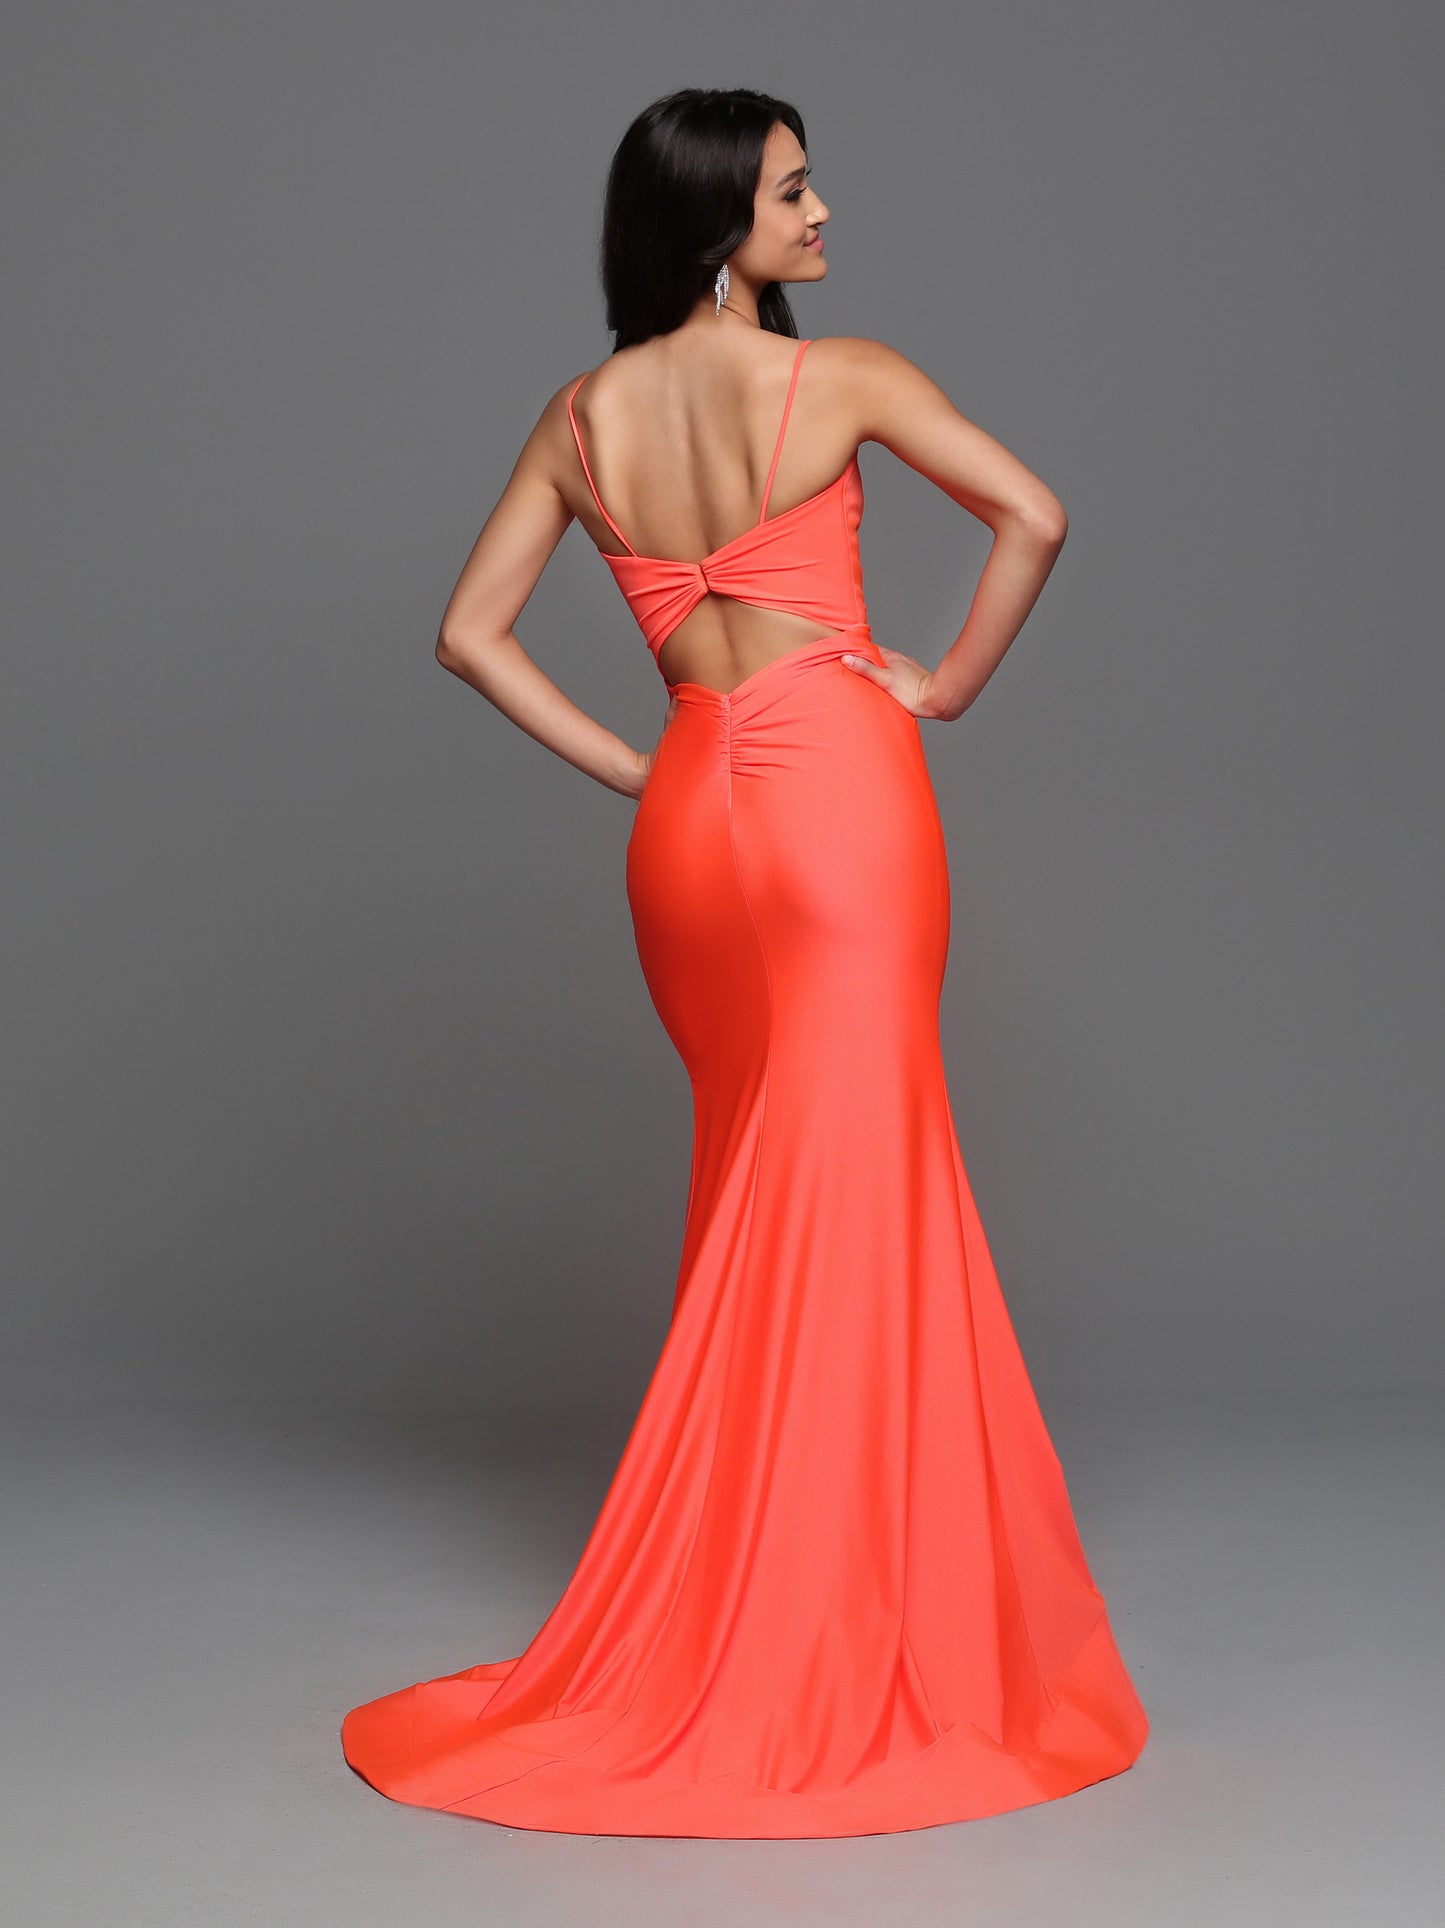 Sparkle Prom 72230 Long Fitted Ruched V Neck Cutout Back Prom Dress Slit Flare Skirt  Sizes: 0-20  Colors: Neon Orange, Purple